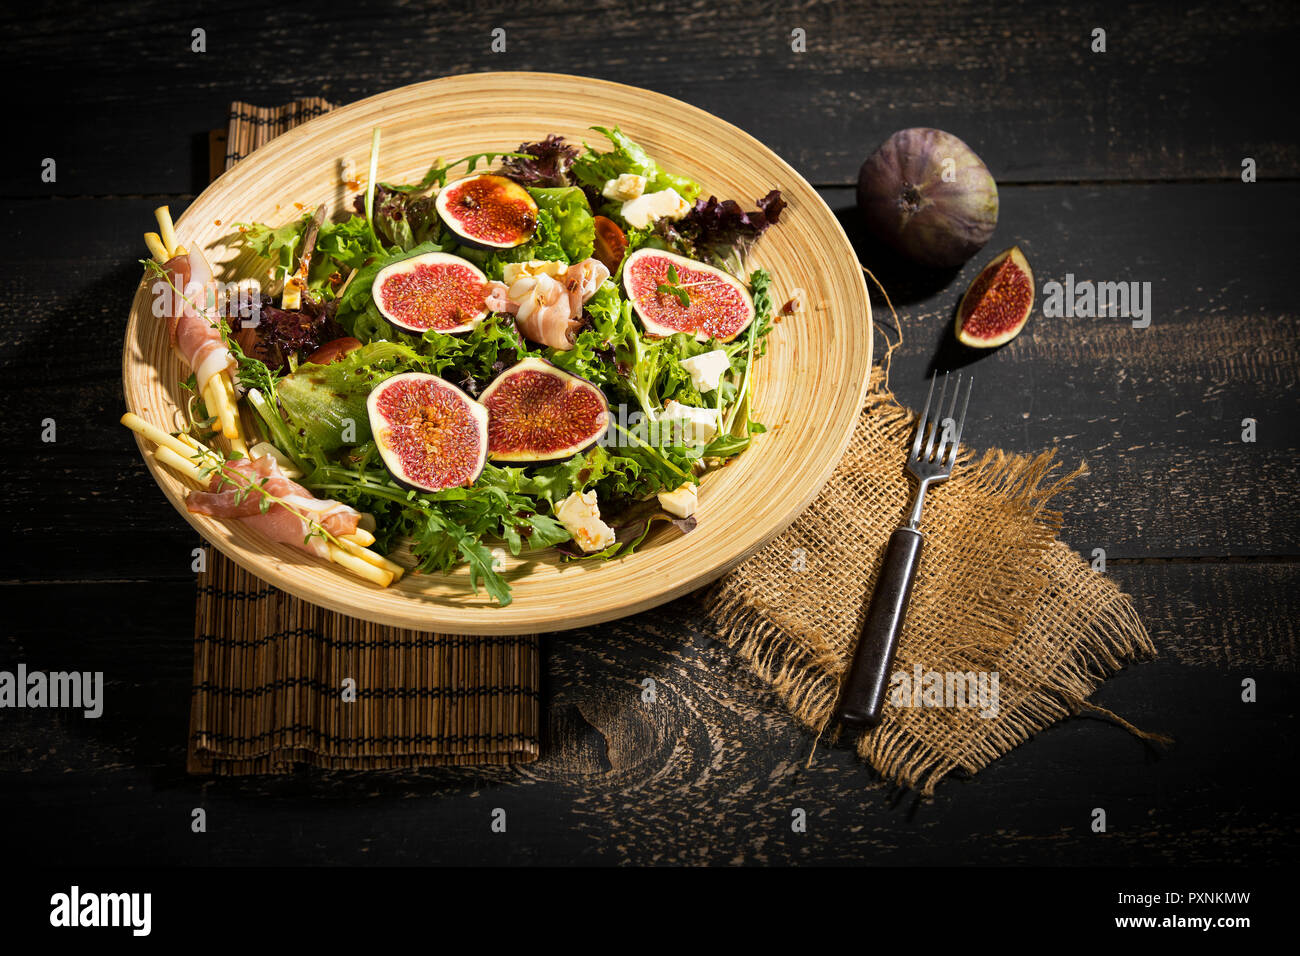 Mixed salad with figs, tomatoes, sheep cheese, grissini with ham on bambus plate Stock Photo